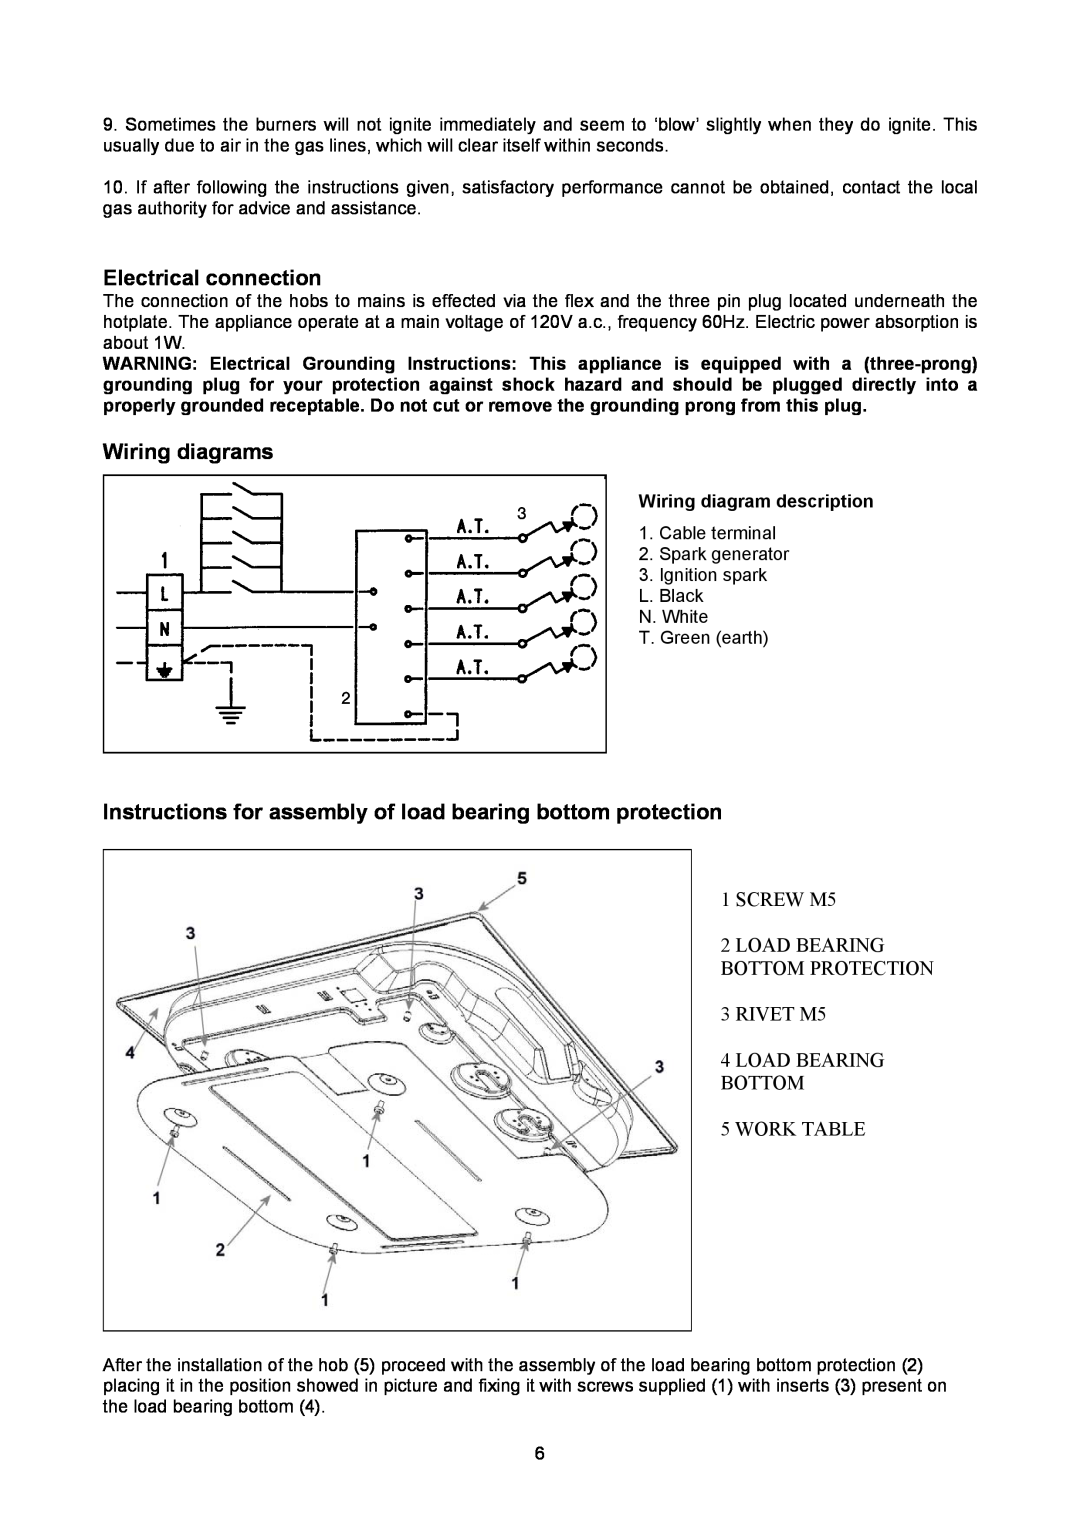 Bertazzoni P34 5 00 X Electrical connection, Wiring diagrams, Instructions for assembly of load bearing bottom protection 